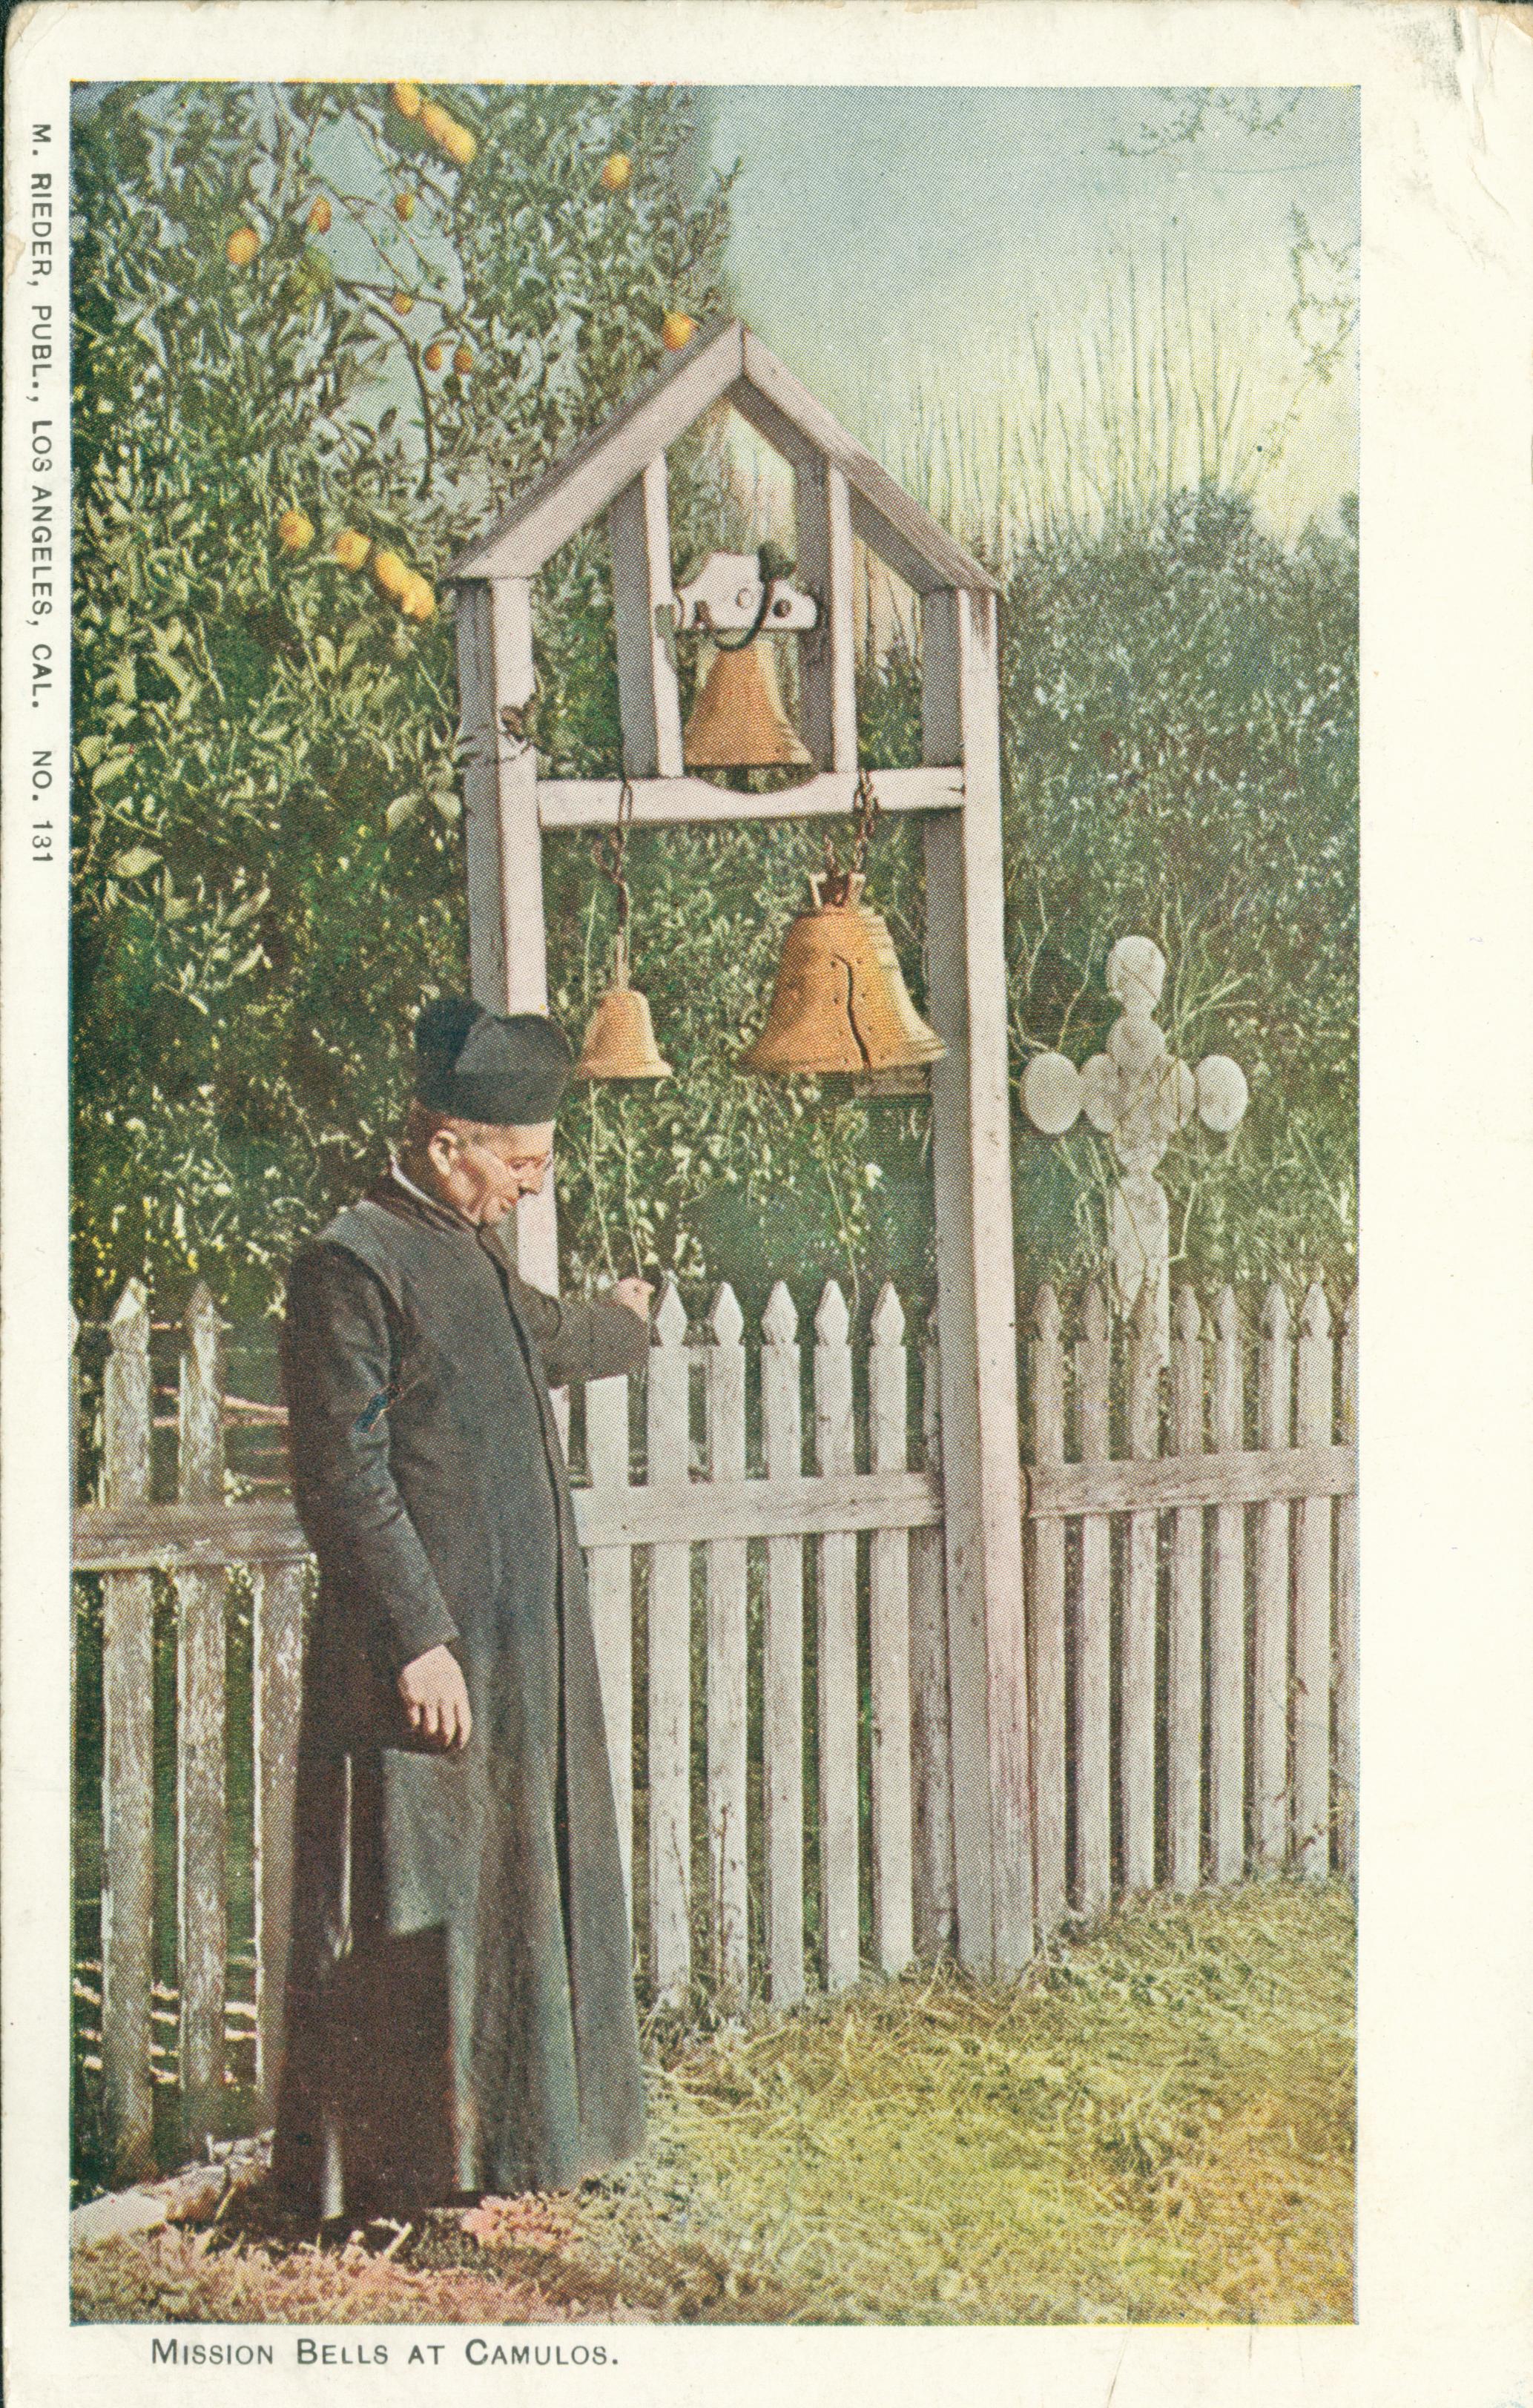 Shows a priest standing next to a wooden structure upon which three bells are hung